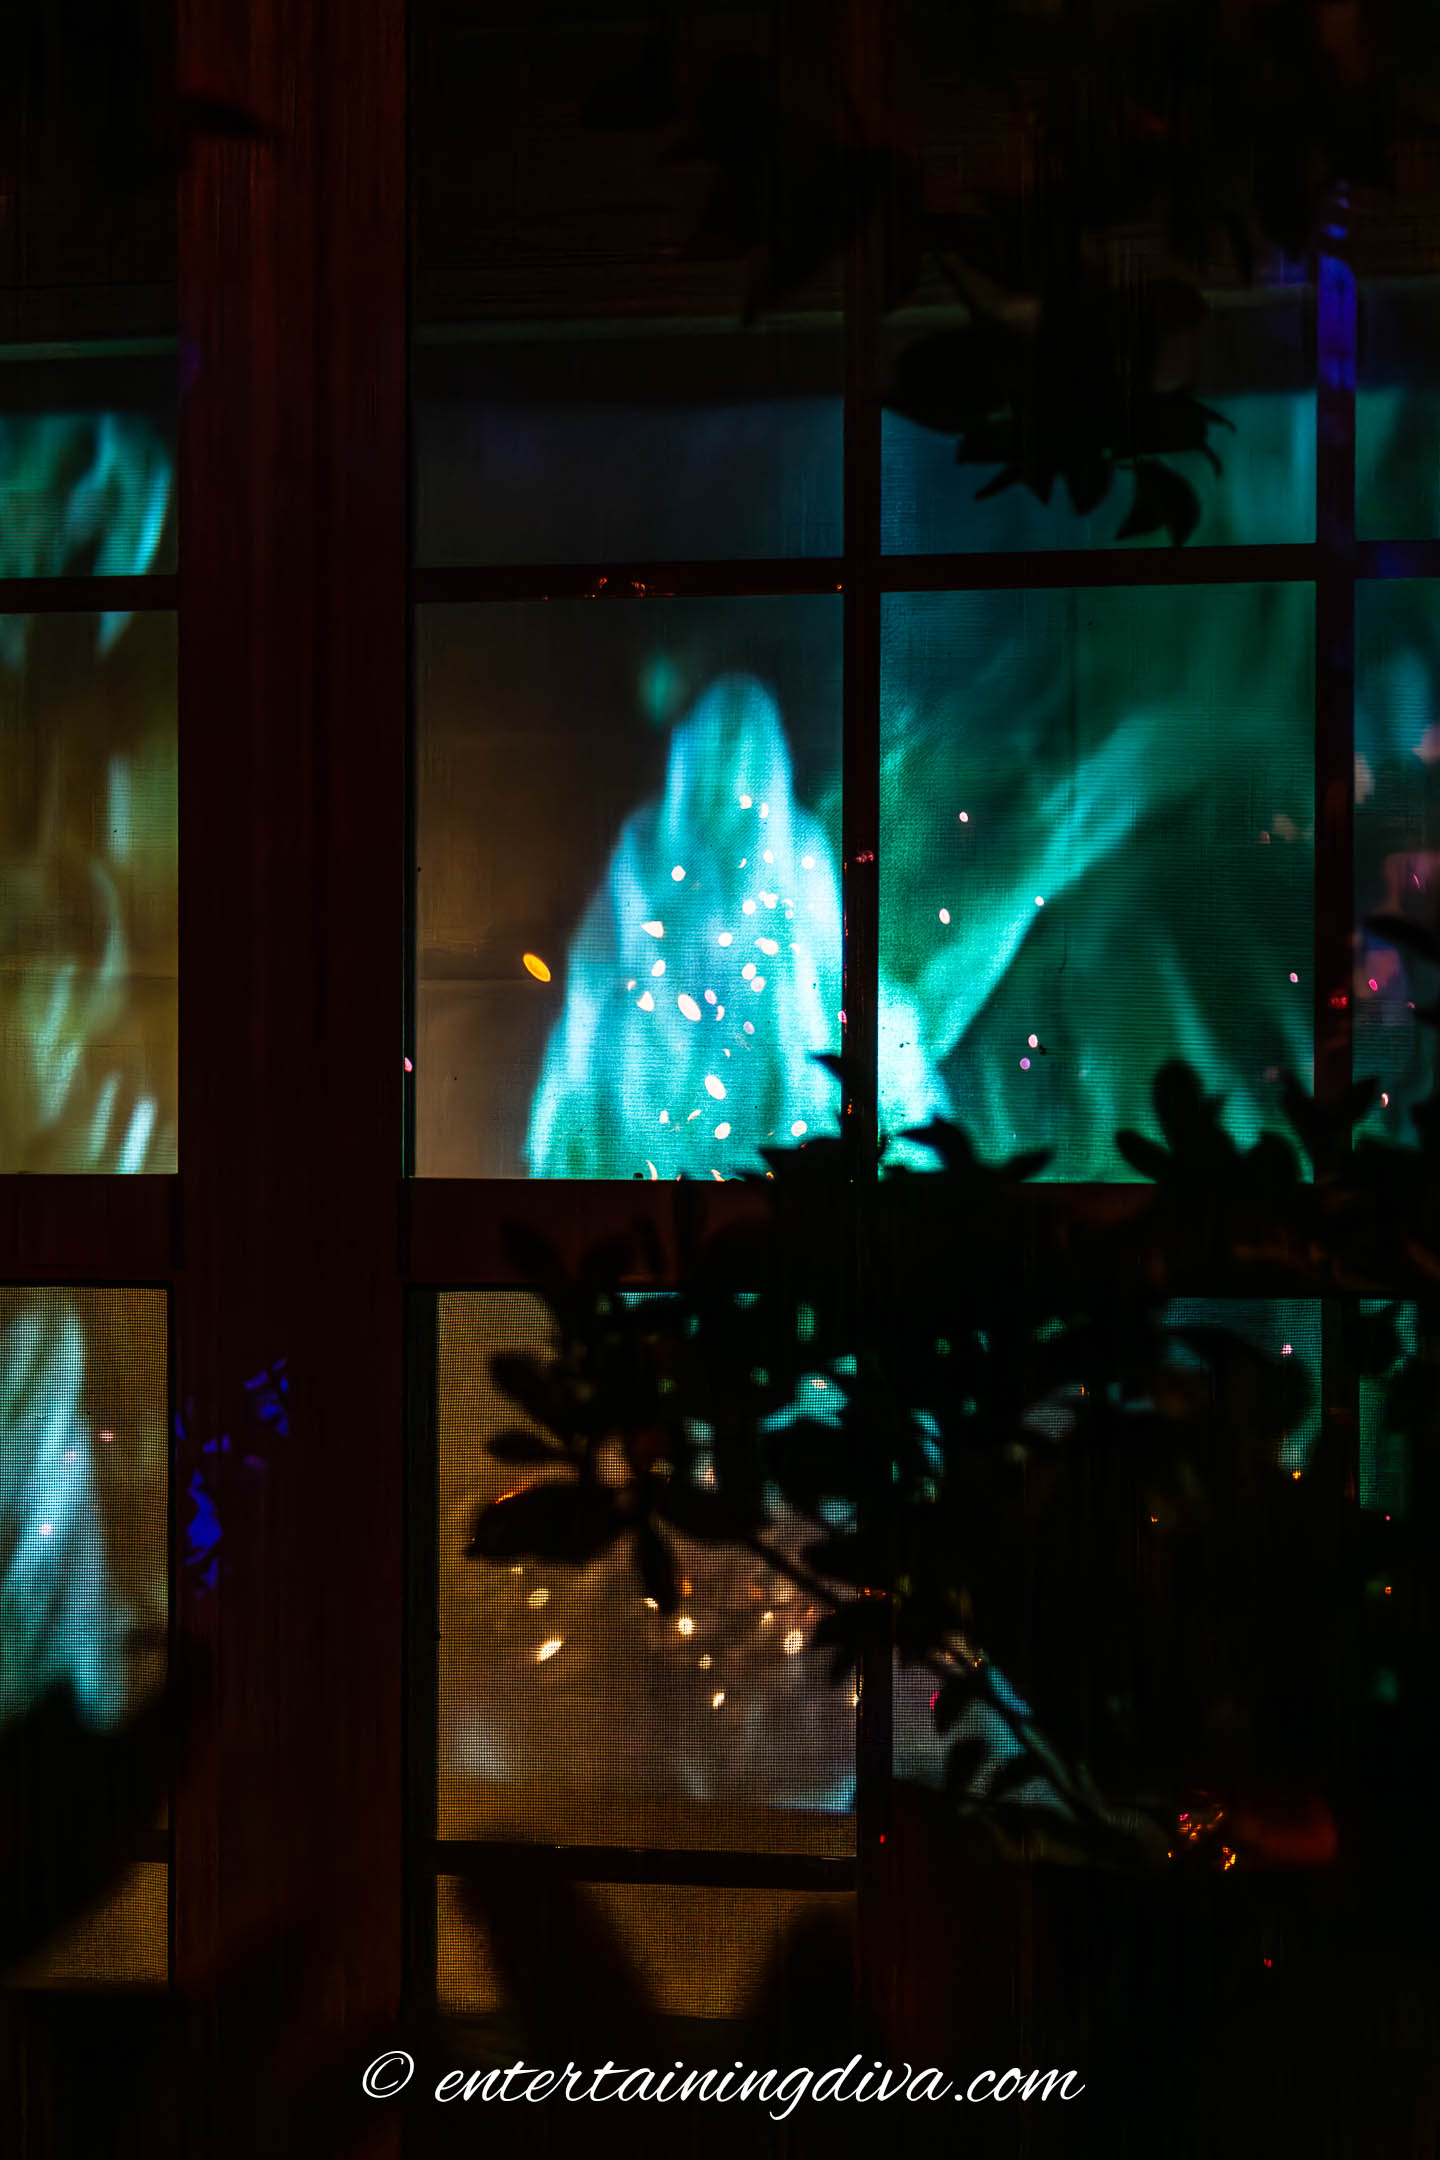 An image of a ghost projected in a Halloween window.